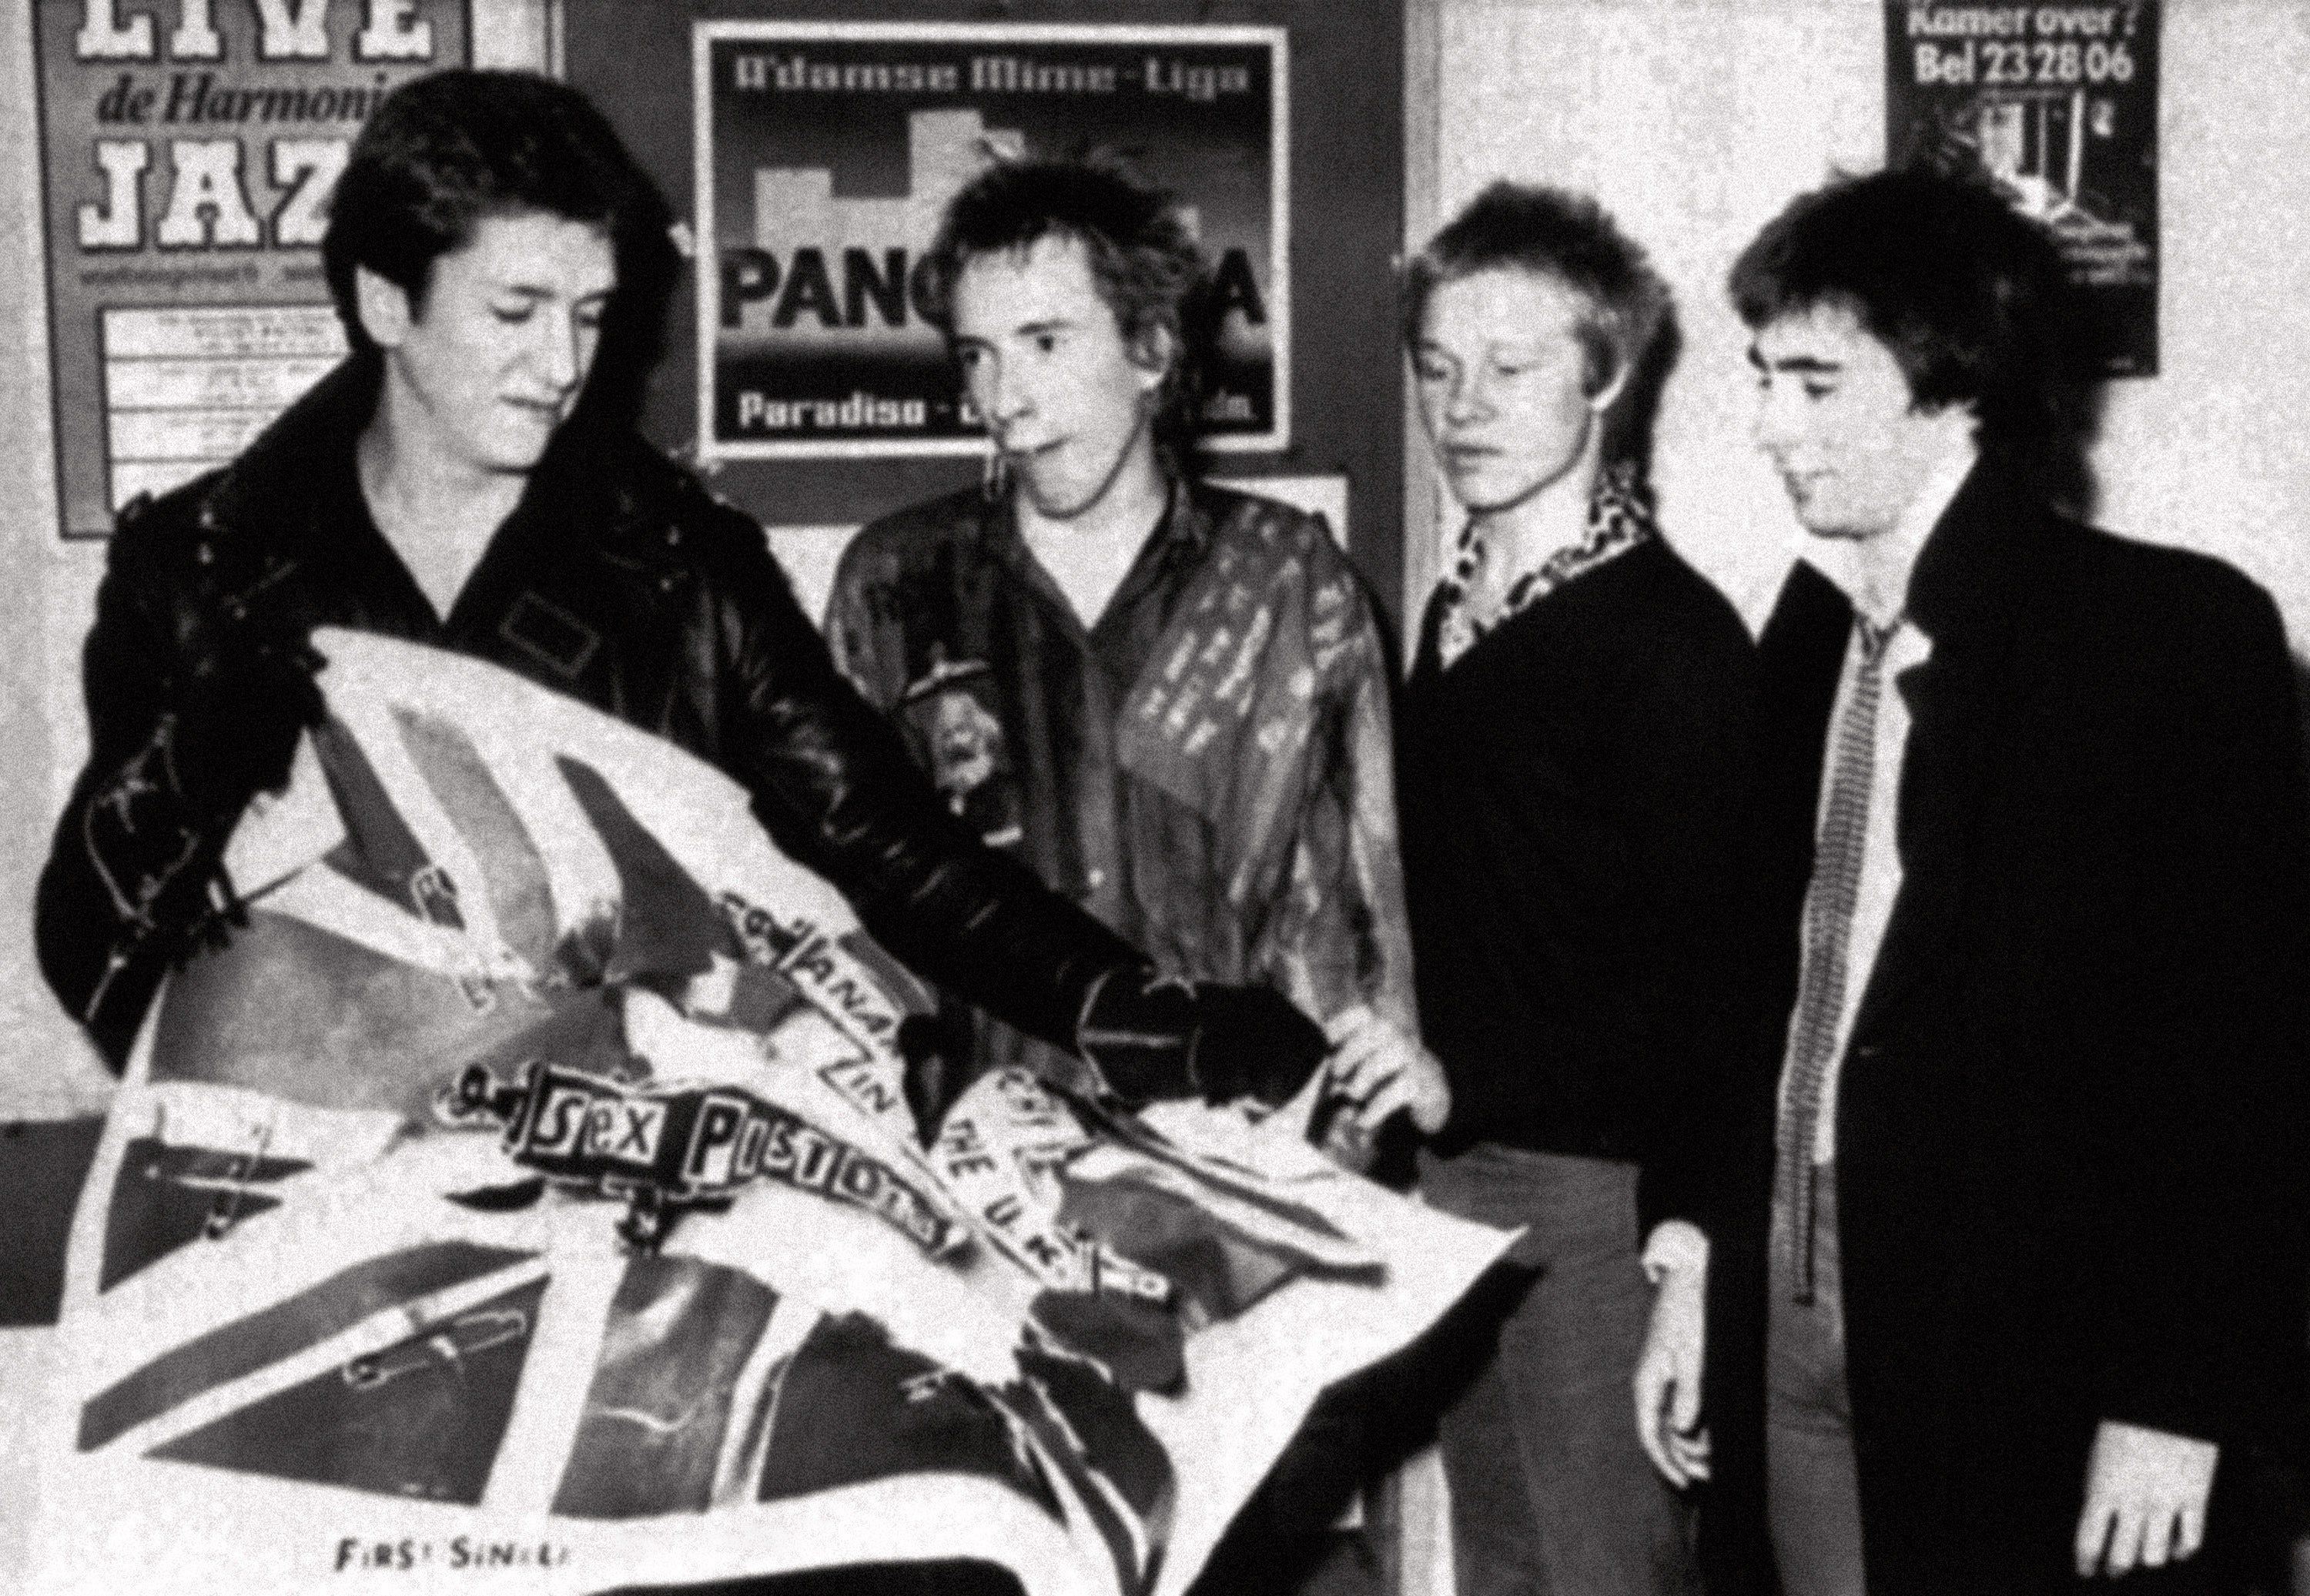 Pete C nominated ‘God Save the Queen’ by the Sex Pistols in the covers better than the original category